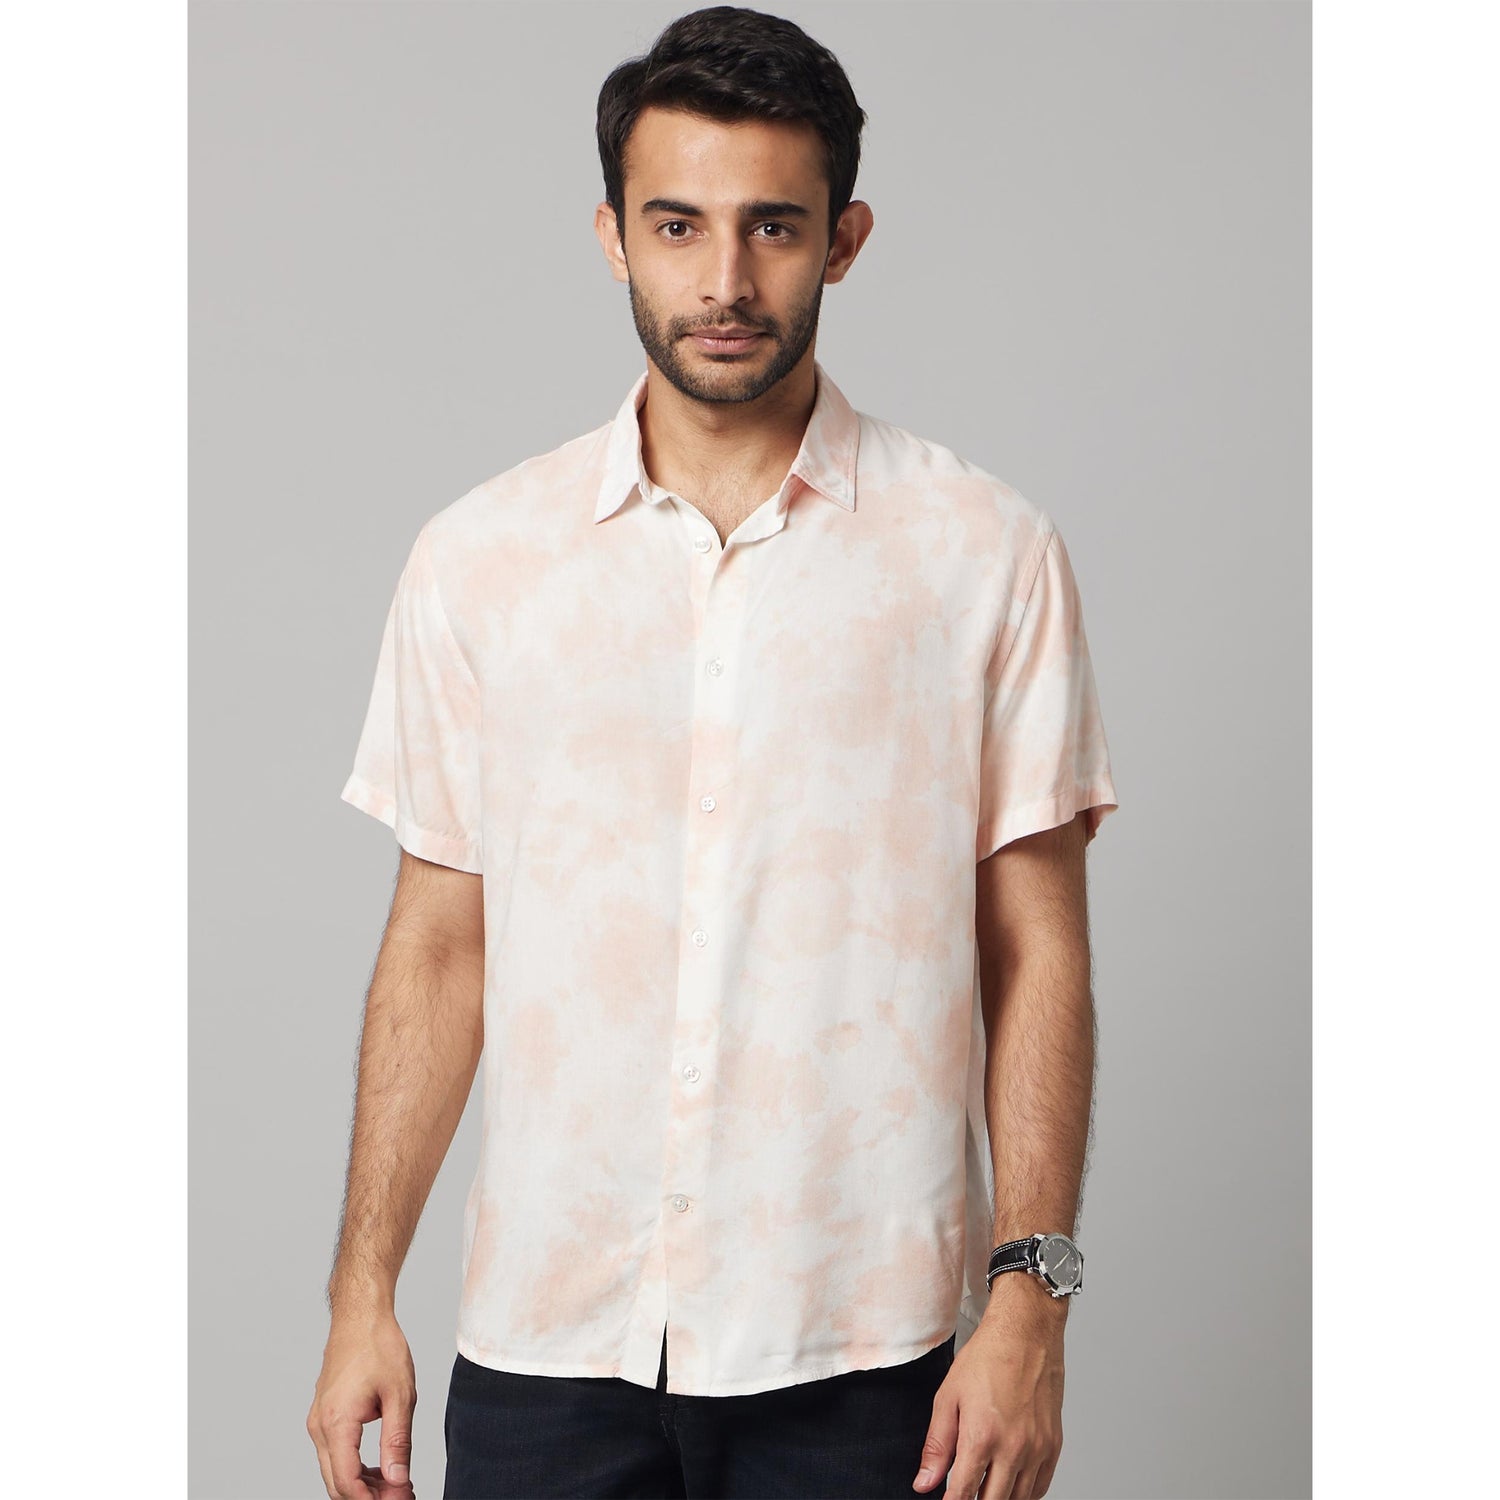 Pink Classic Tie and Dye Spread Collar Cotton Casual Shirt (DACOTTYE)